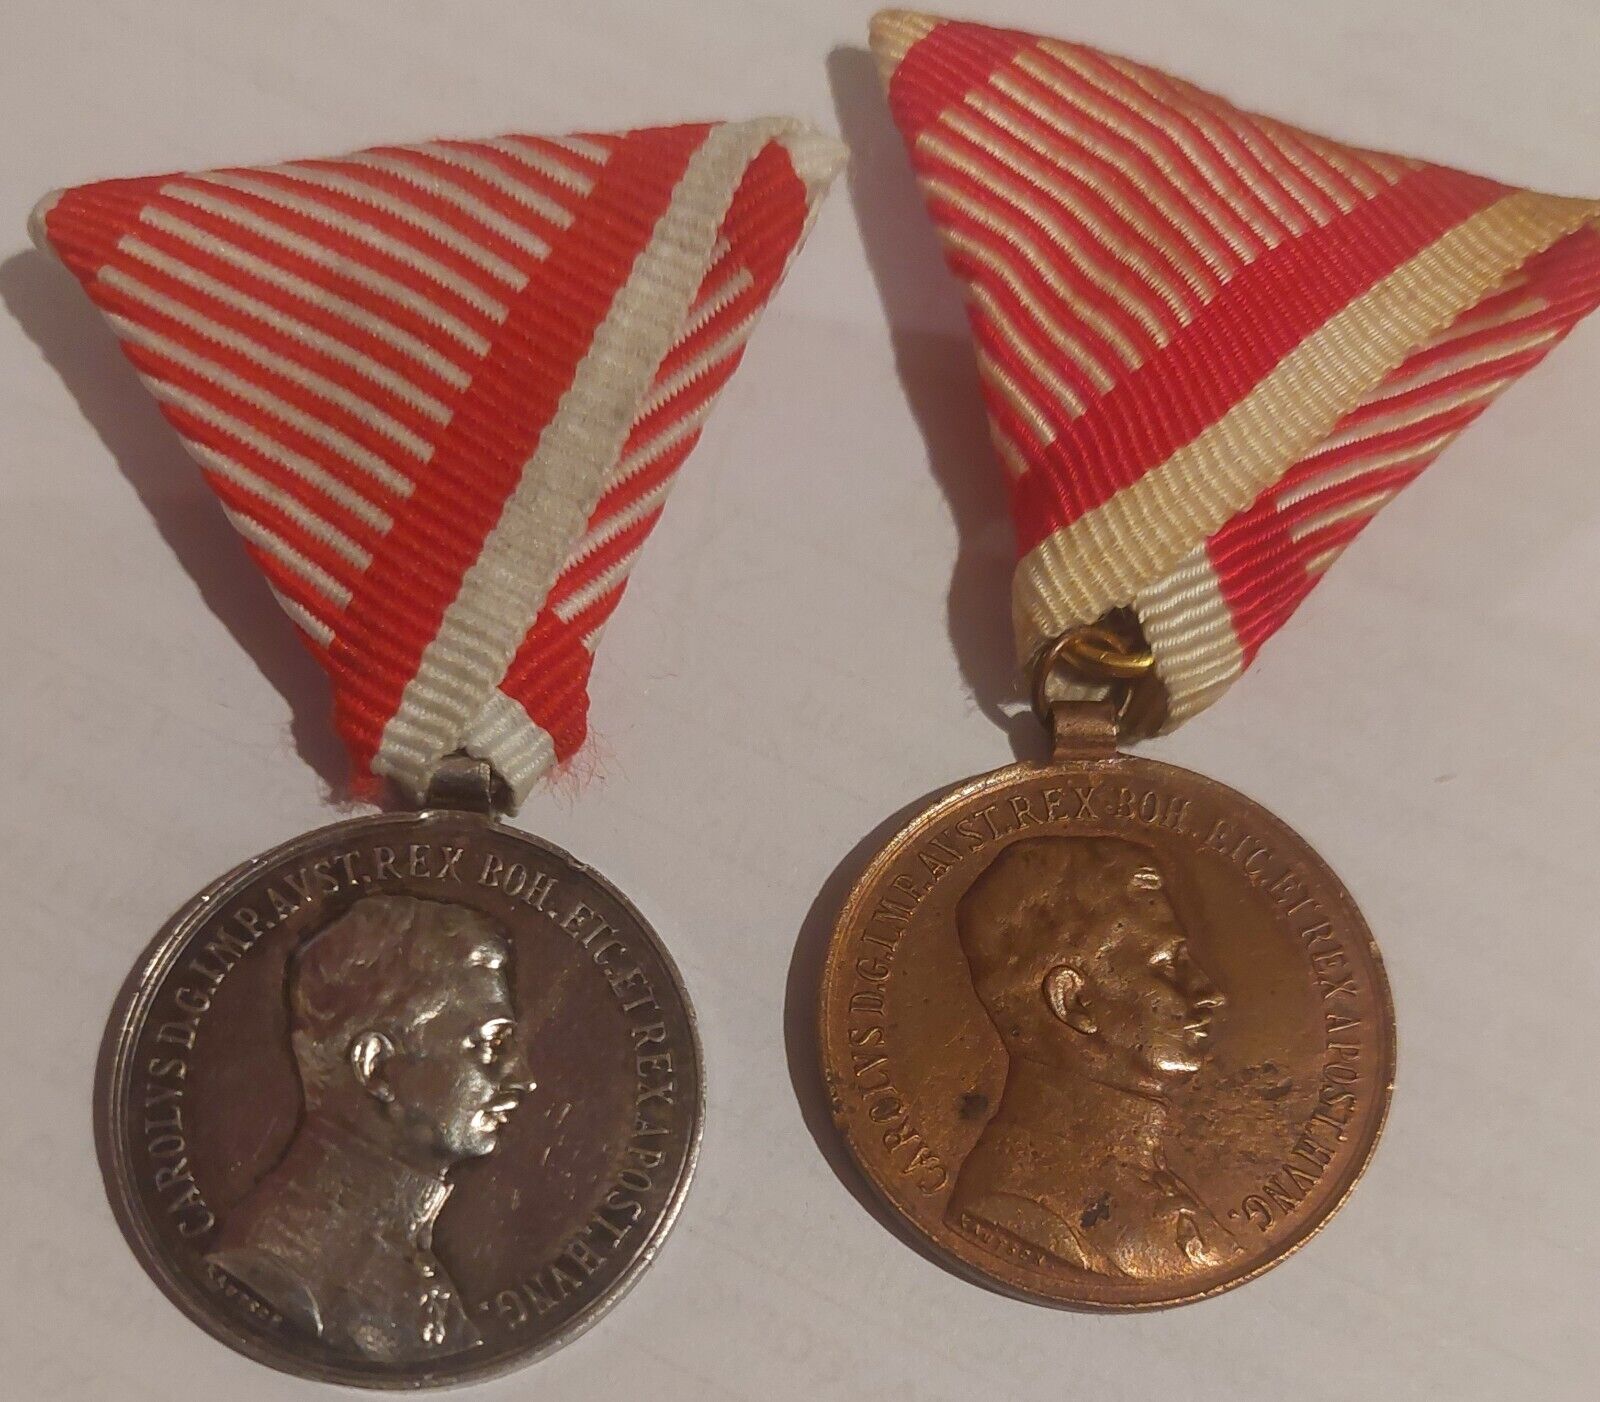 AustroHungary Medals for Bravery-Fortitvdini-Bronze and Silver version of medal